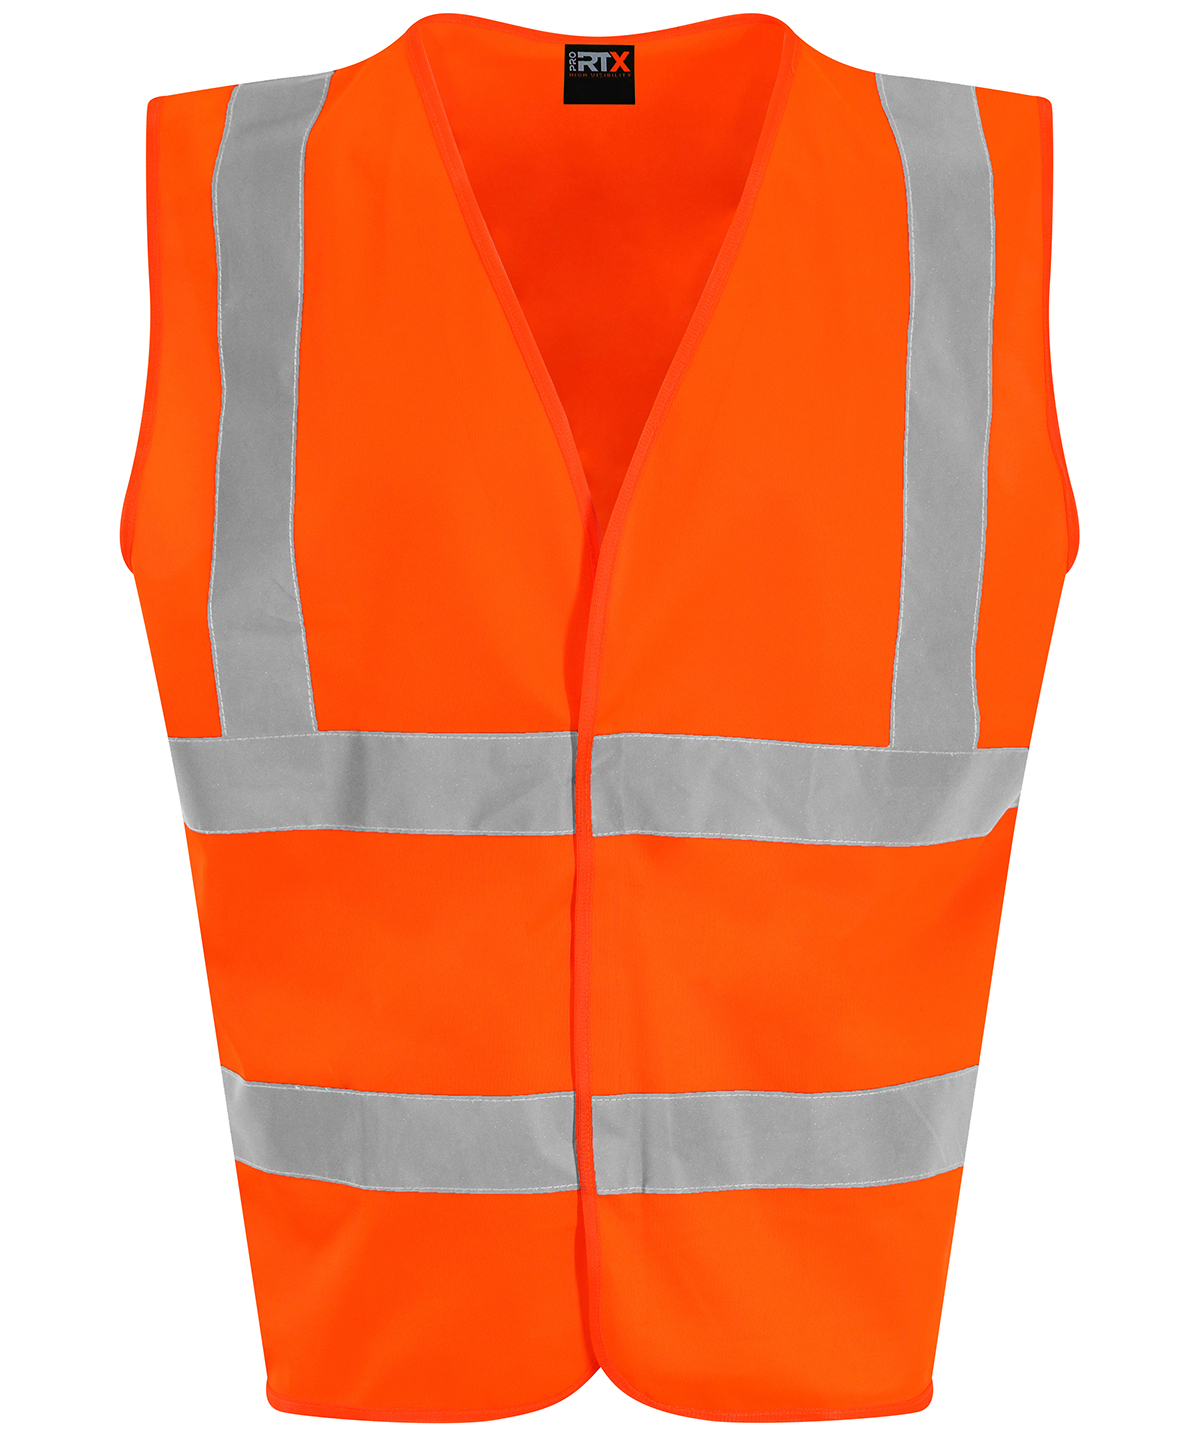 PRO RTX High Visibility Waistcoat - Larry Adams Meanswear